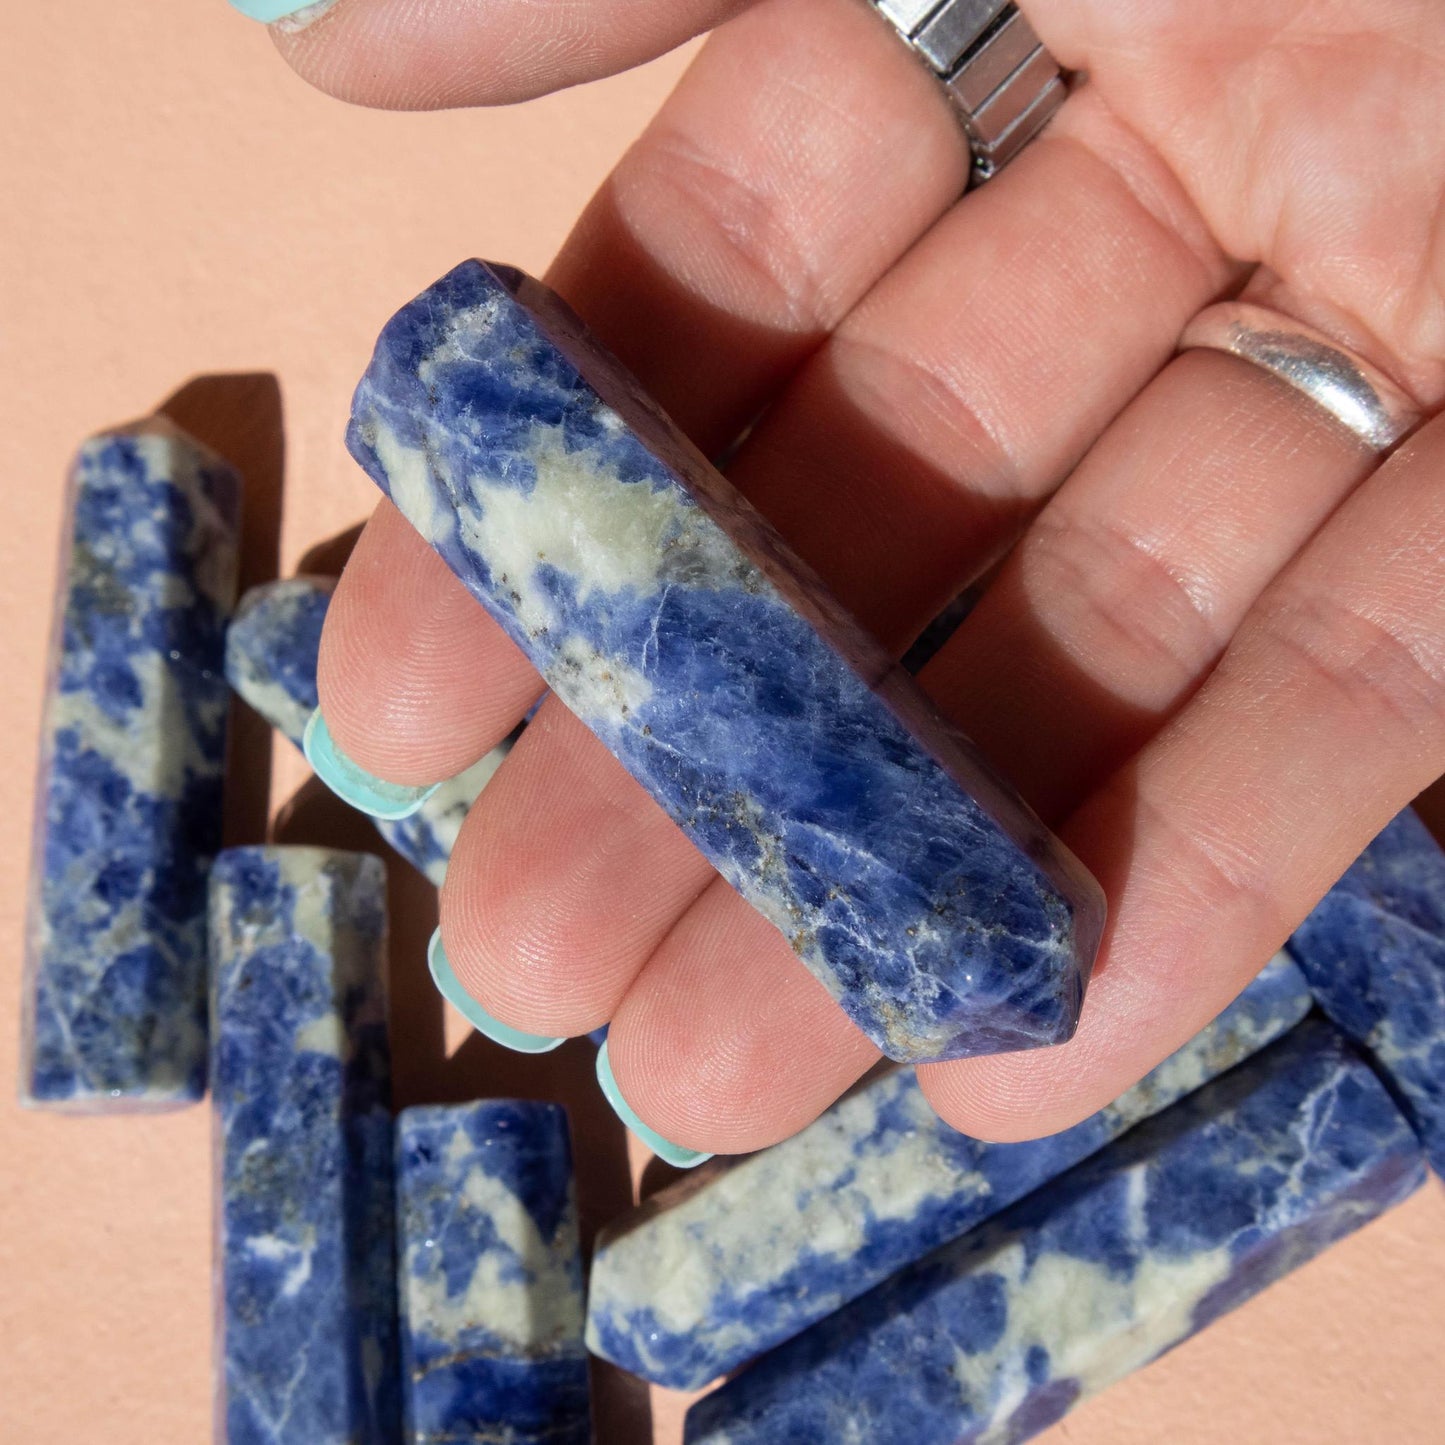 sodalite, sodalite point, crystal point, sodalite crystal, gemstone point, sodalite stone, sodalite gemstone, sodalite properties, sodalite healing properties, sodalite metaphysical properties, sodalite meaning